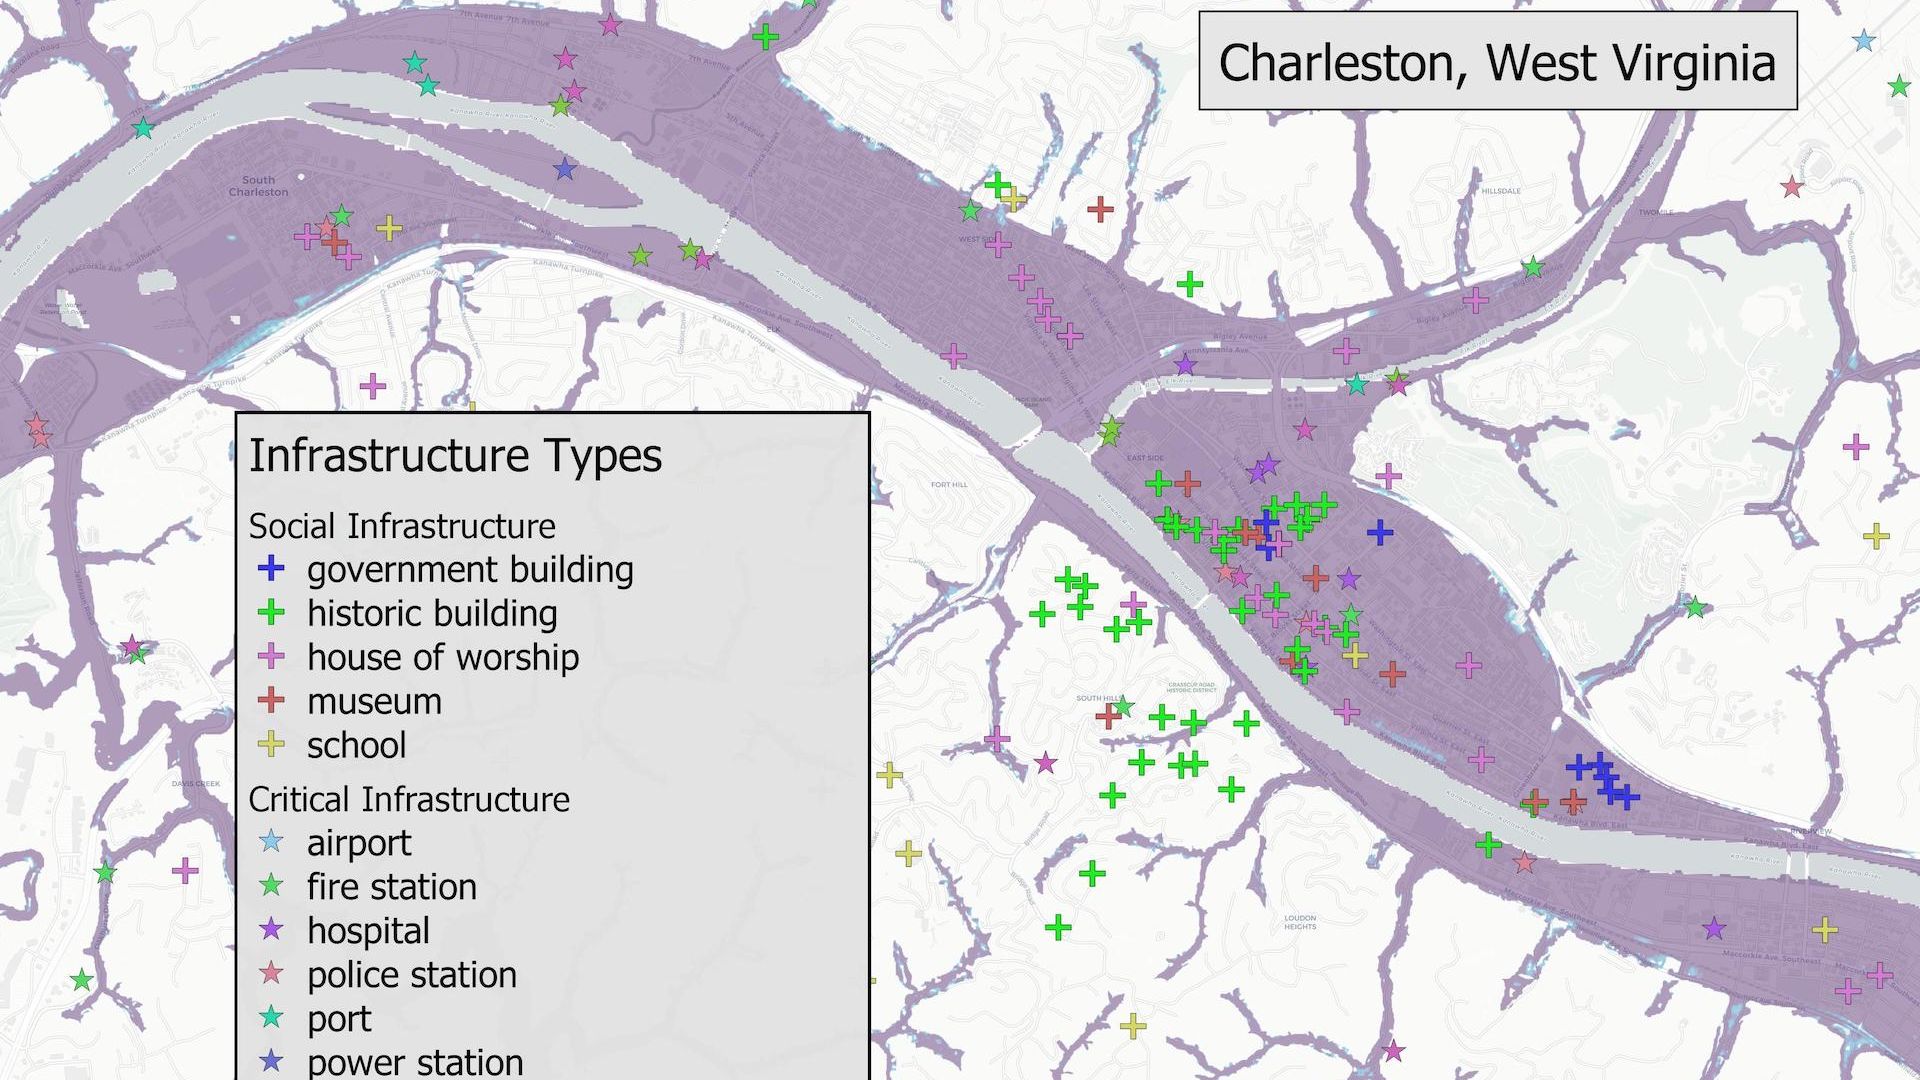 Flood risks to critical infrastructure in Charleston, West Virginia.